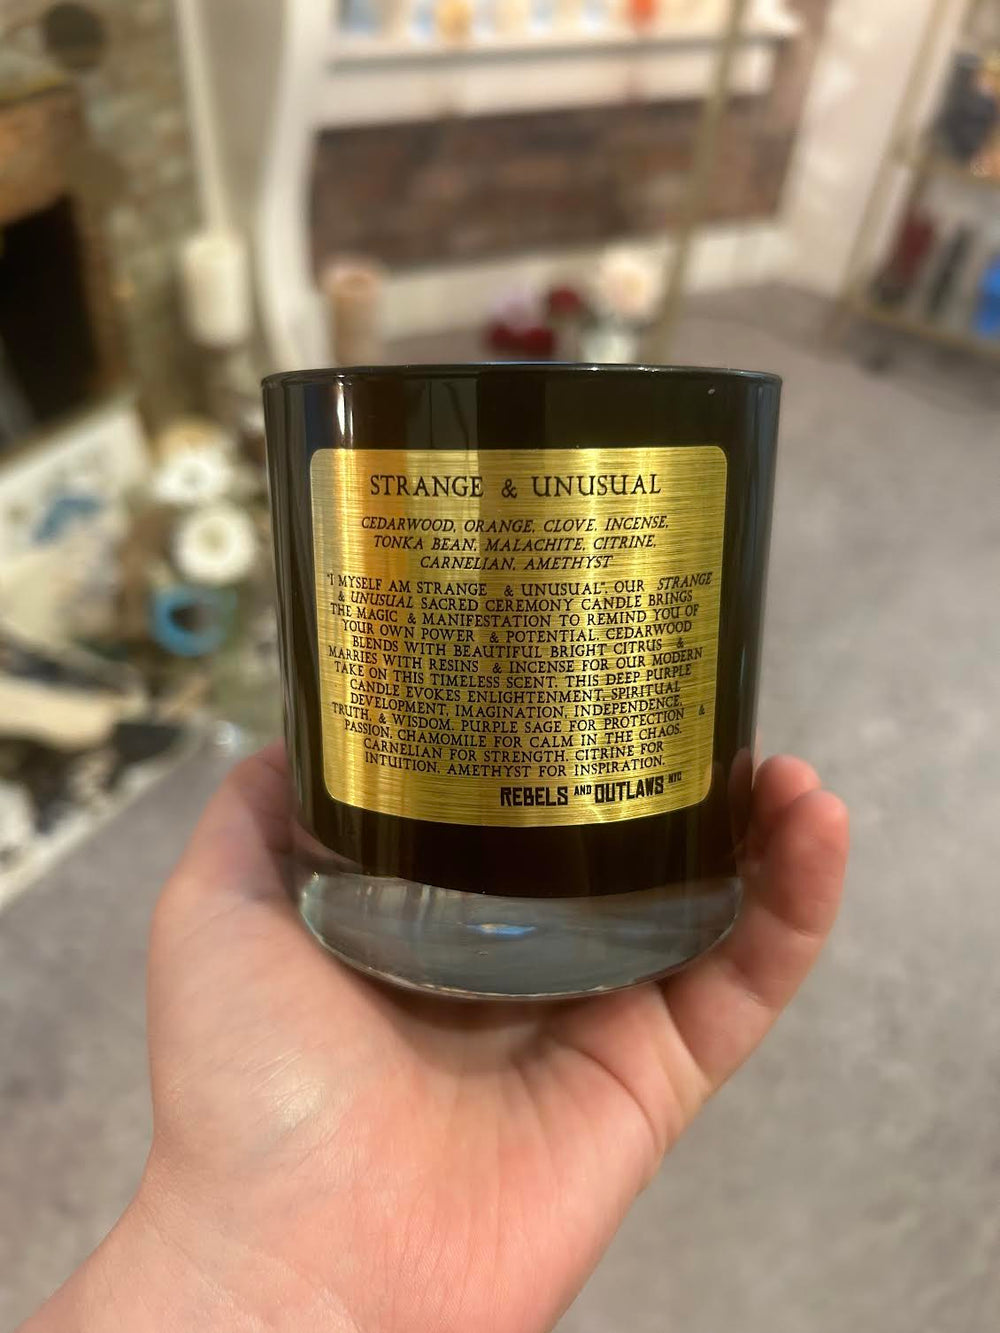 This is the front of the Strange & Unusual candle